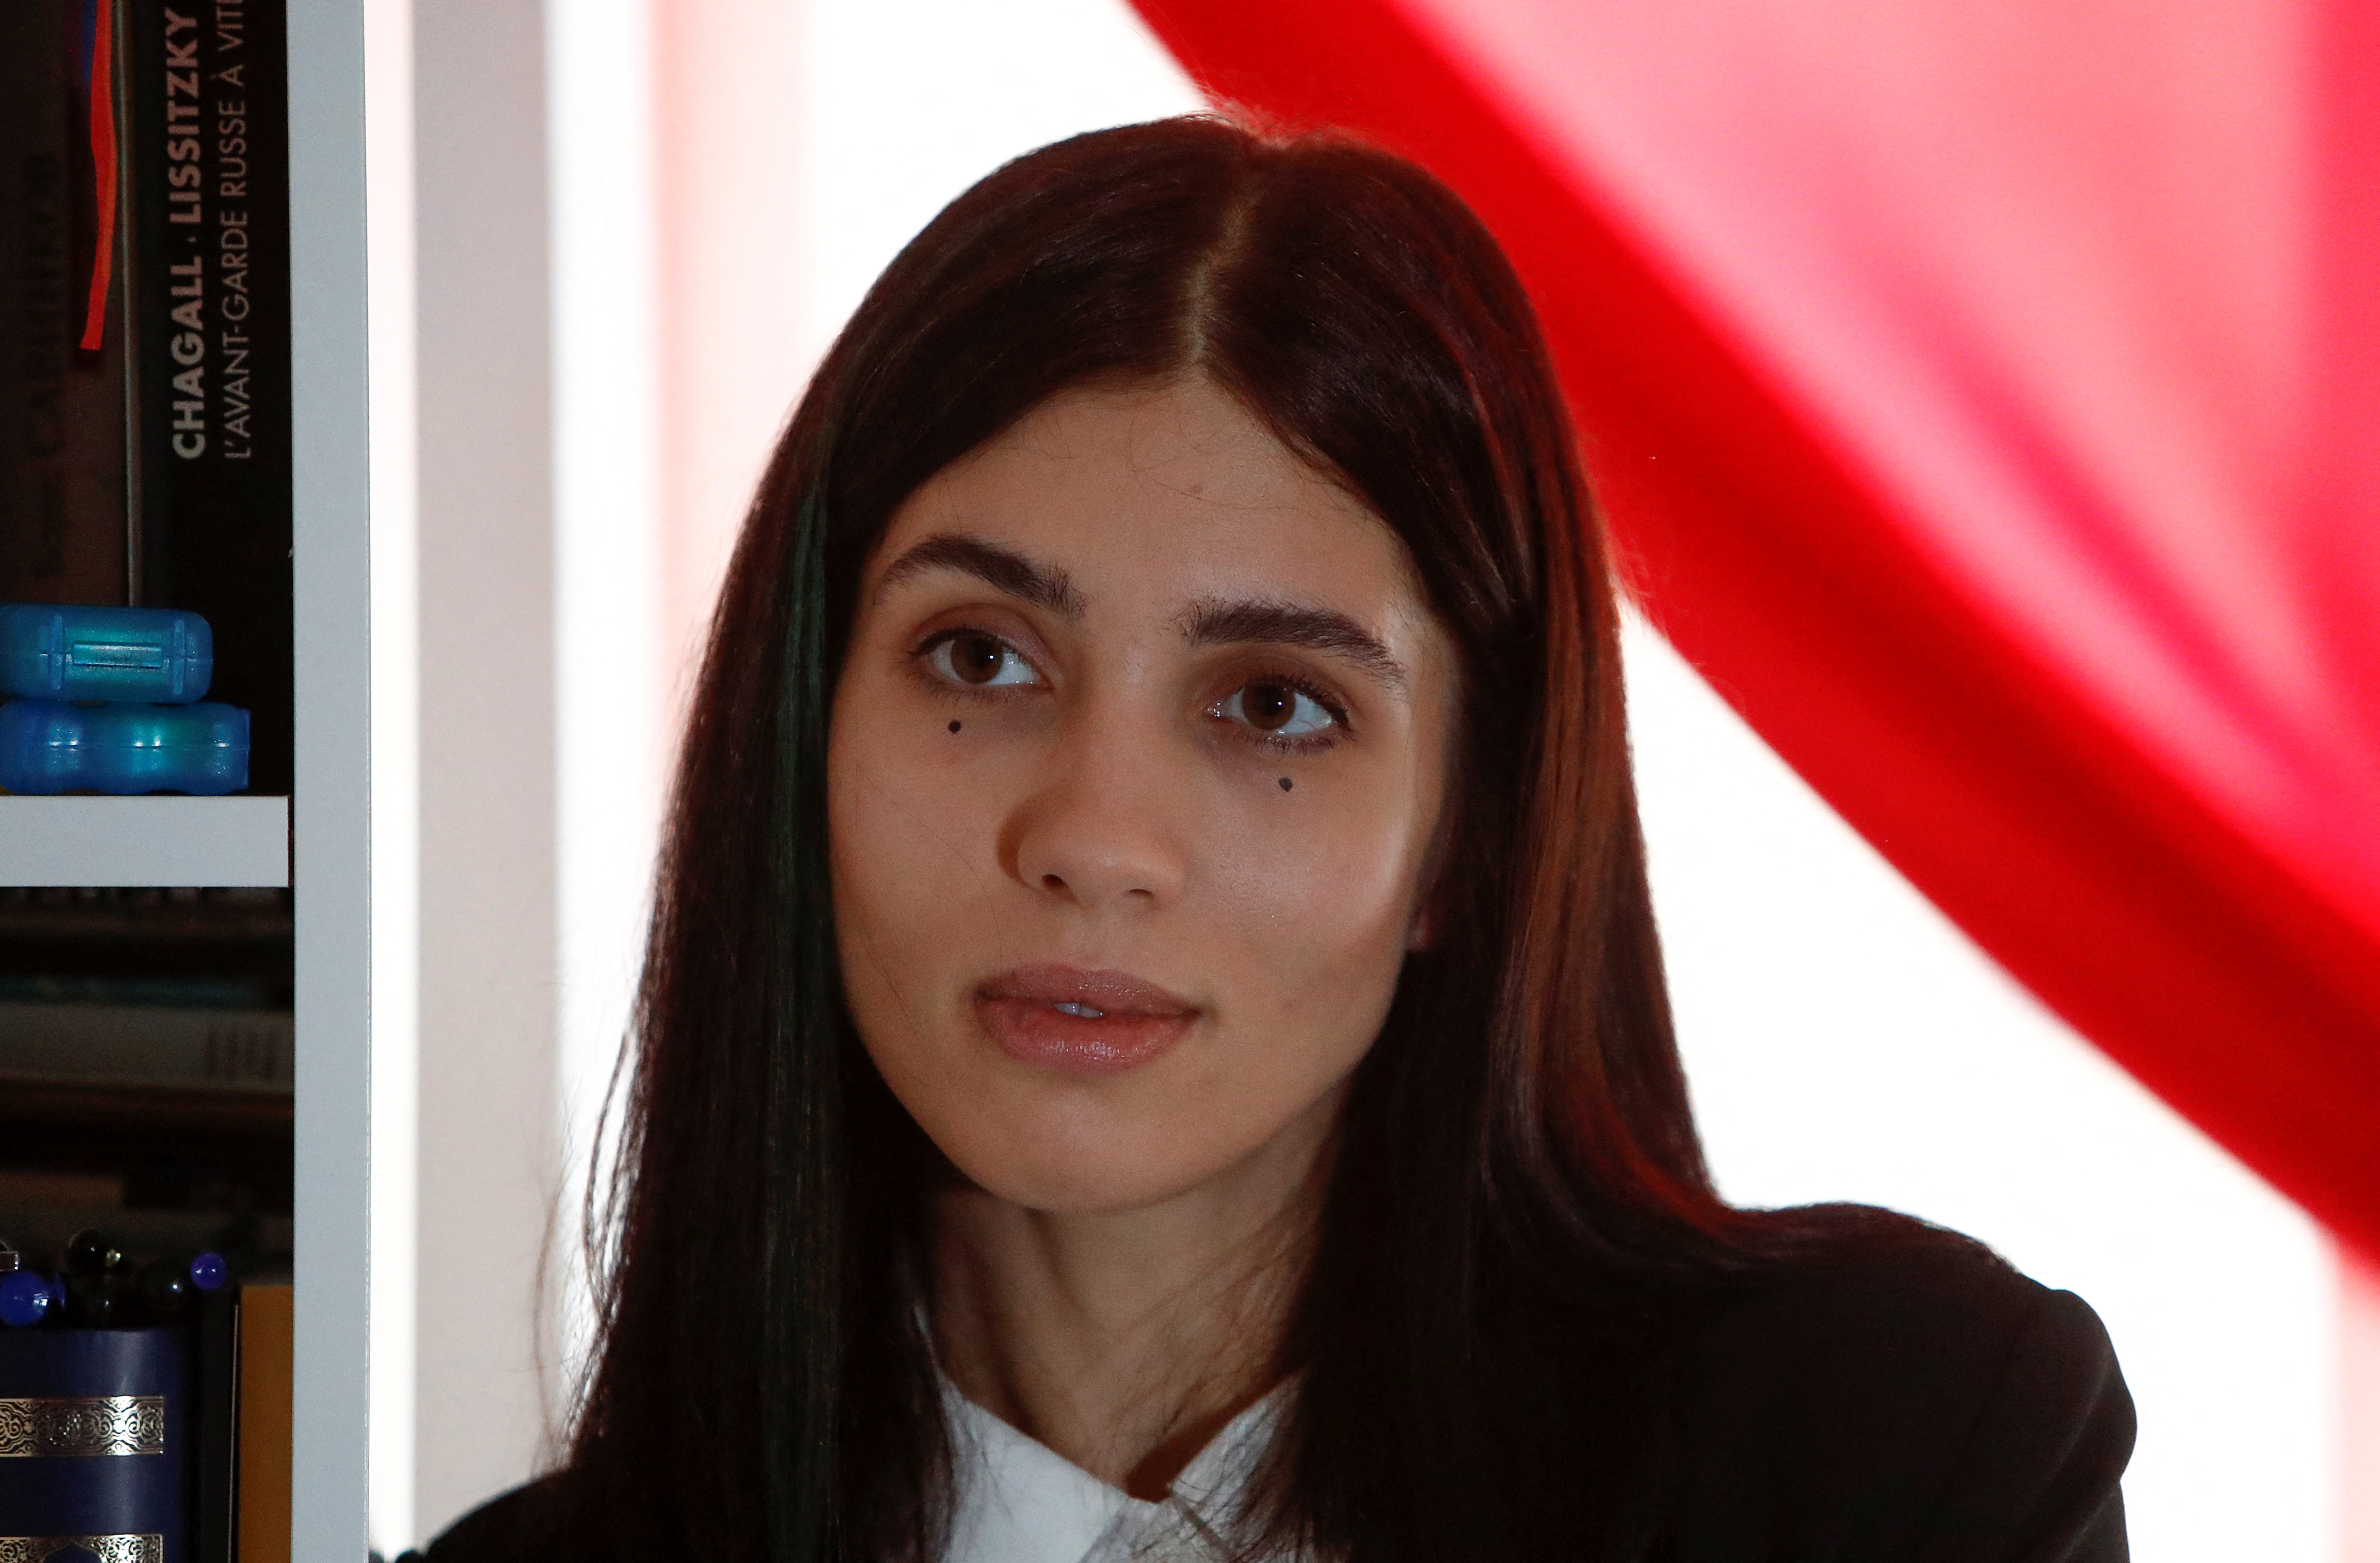 Pussy Riot founder Tolokonnikova speaks during an interview in Moscow